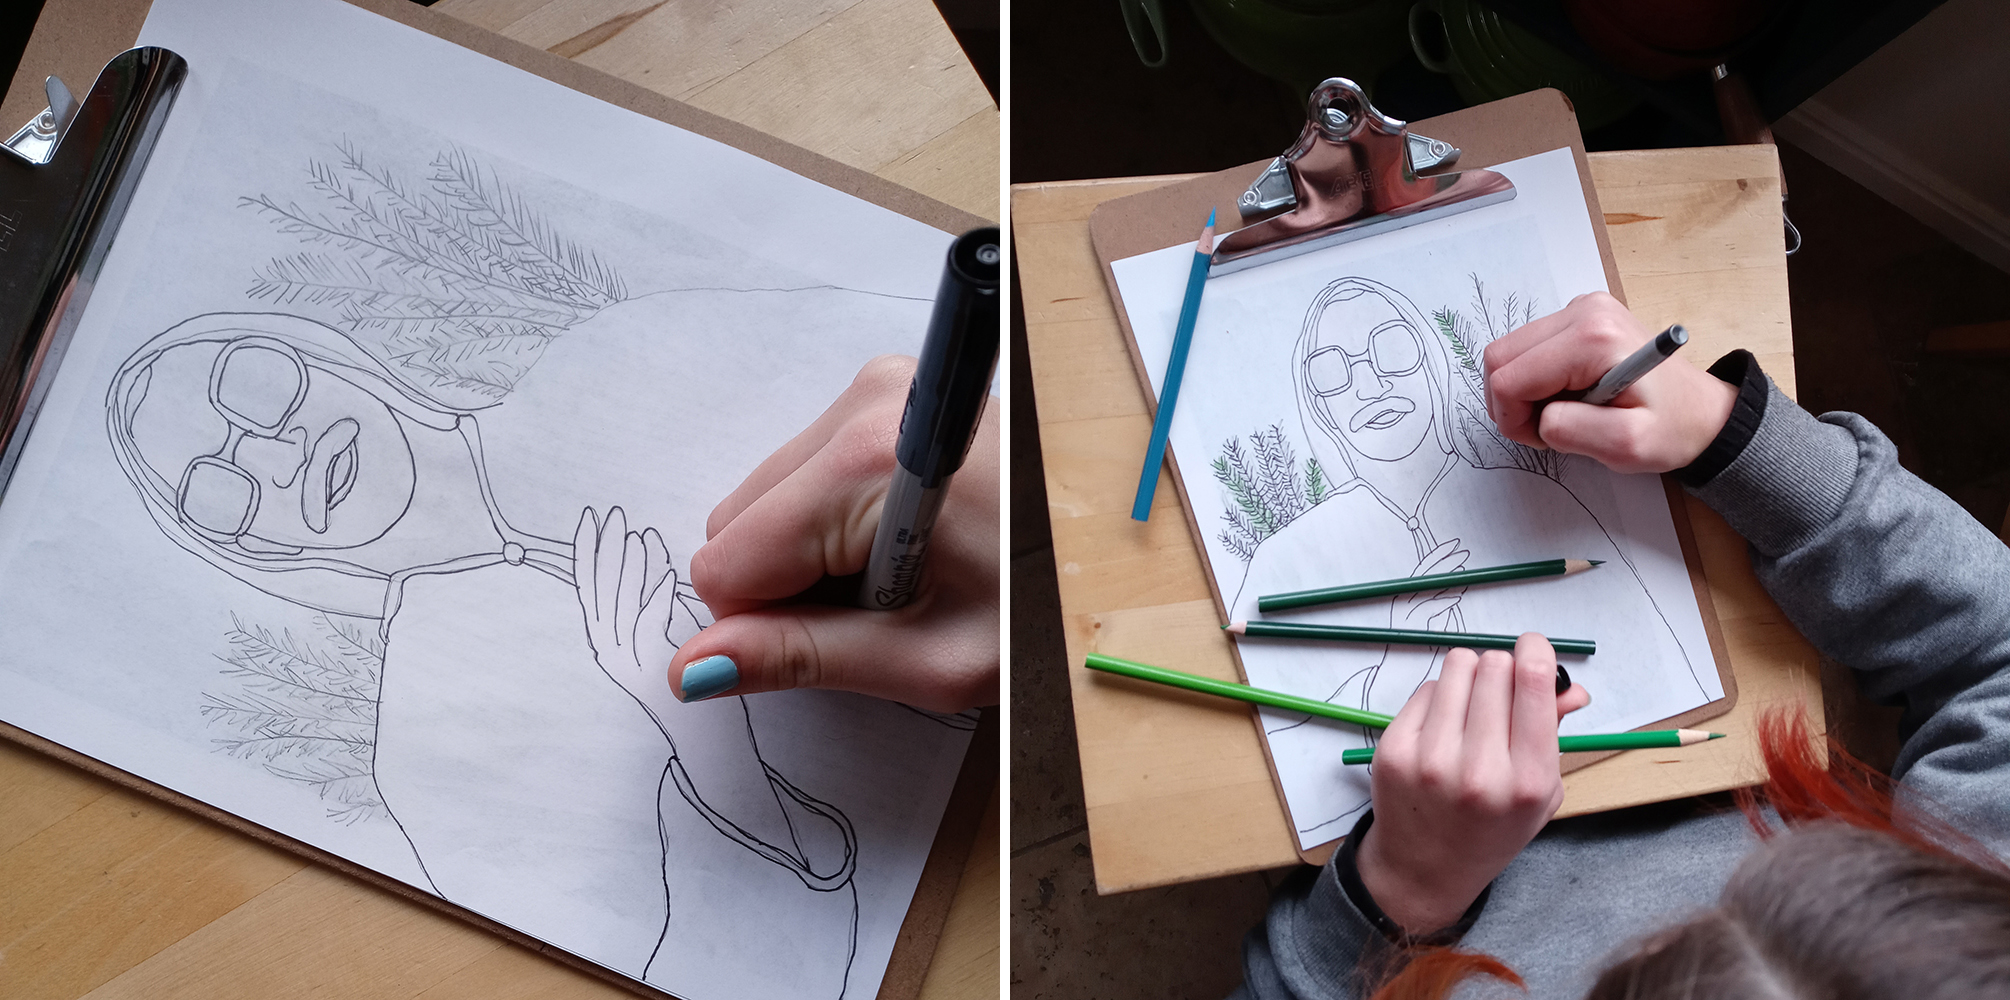 two images on a black line drawing of a man with sun glasses and hoodie the artist's hands visible drawing